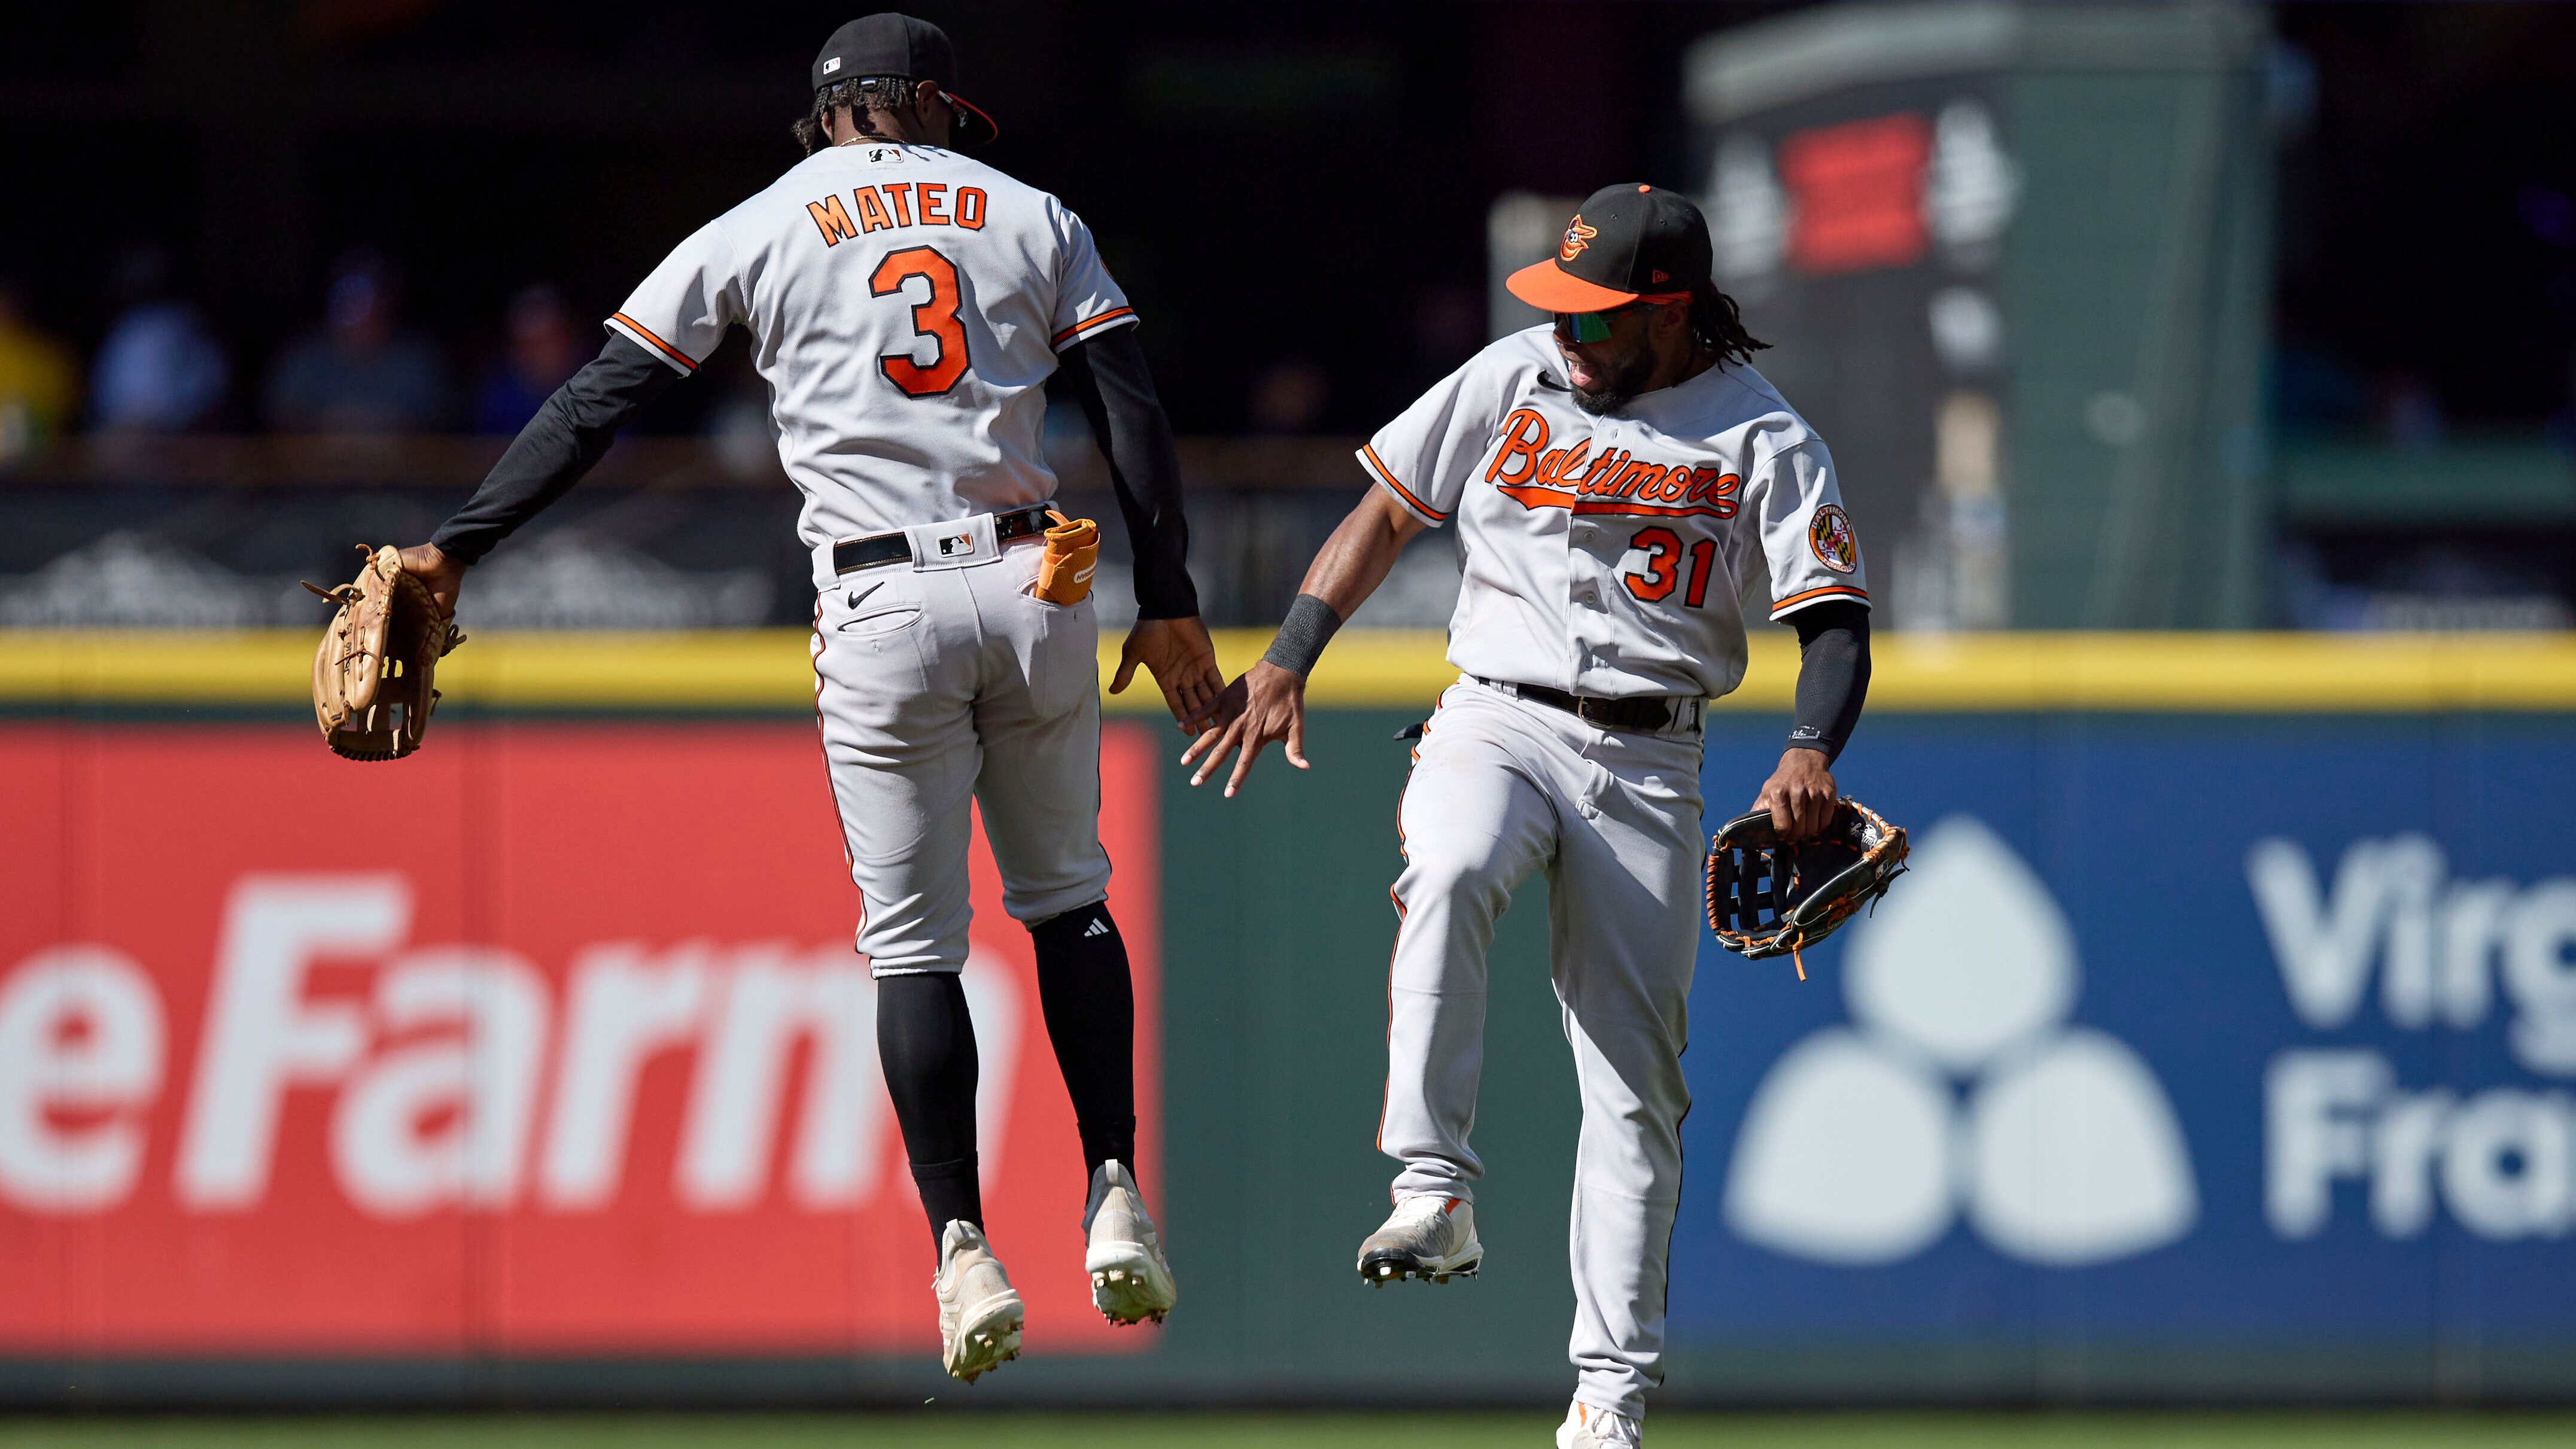 Orioles news: The wild card grind continues for the Orioles - Camden Chat